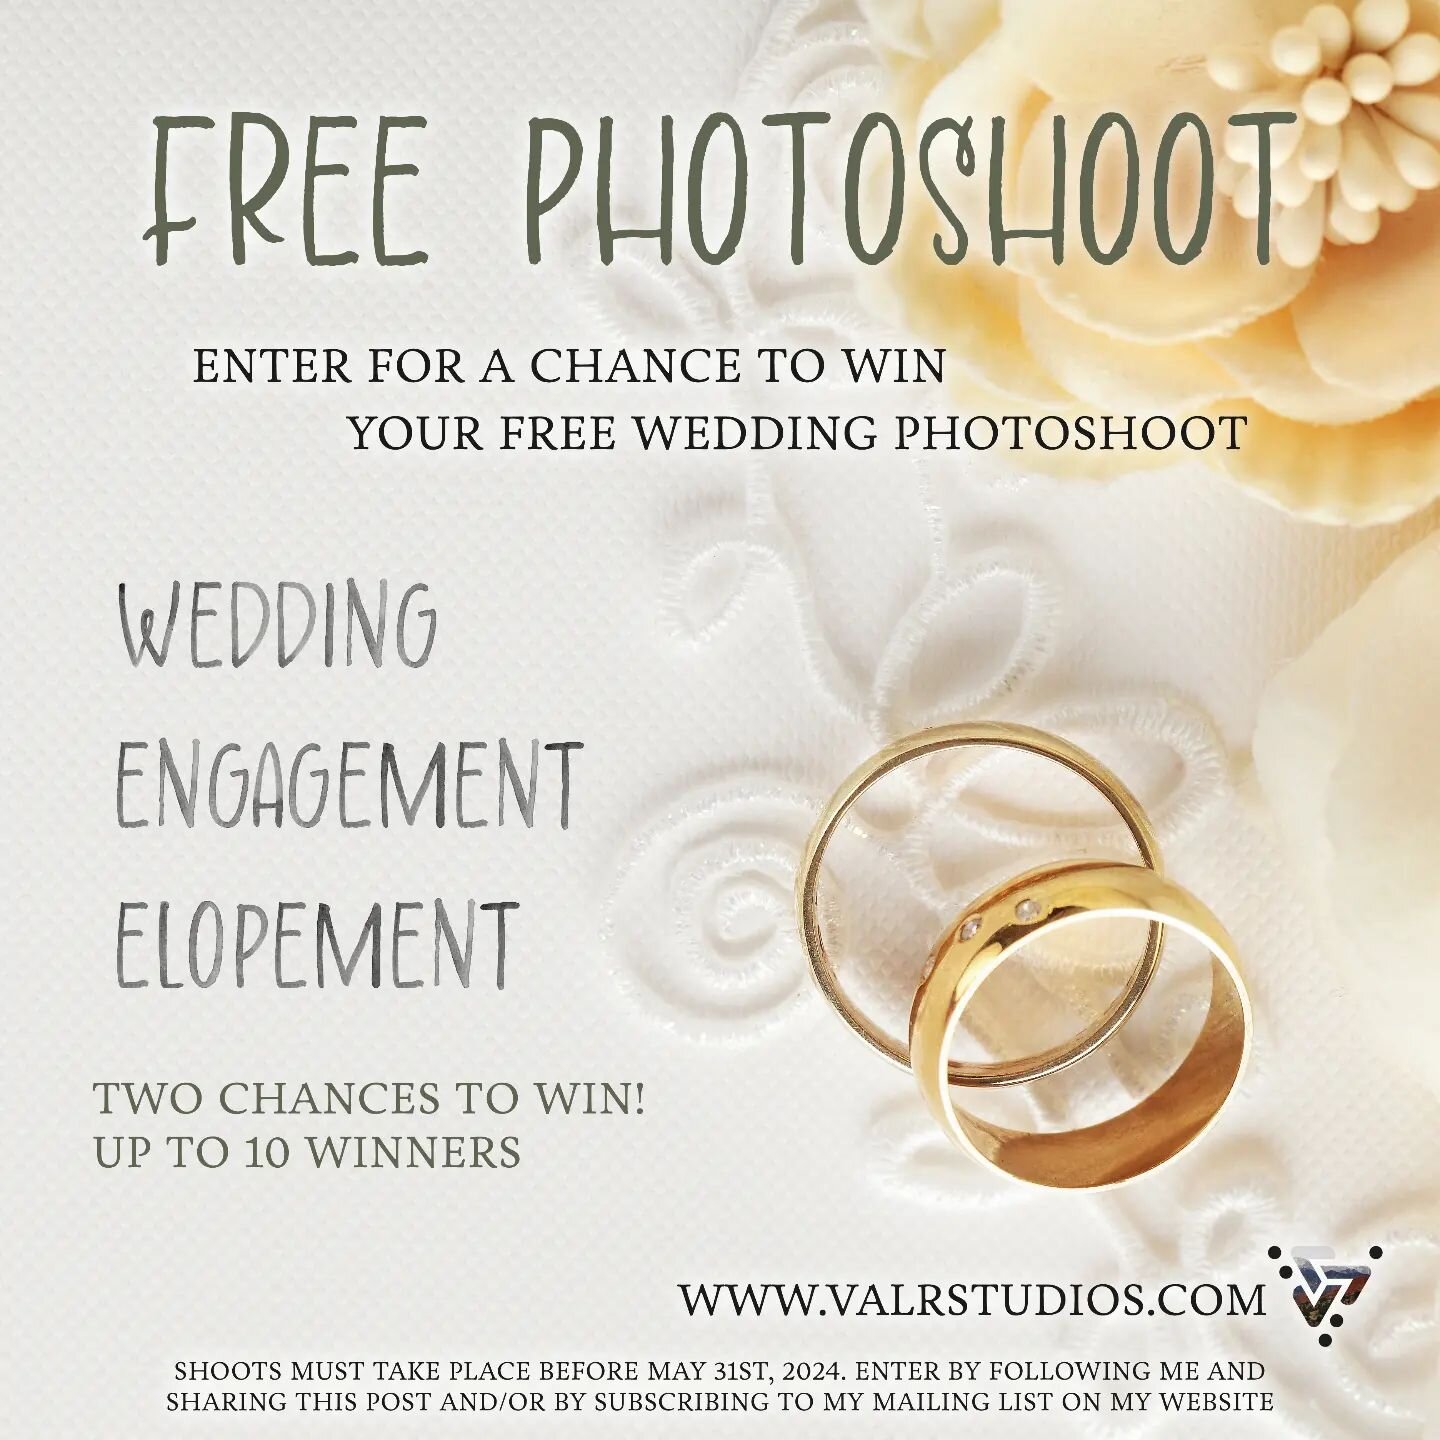 ✨GIVEAWAY: Photoshoots!✨
We&rsquo;re on a mission to capture love in its purest form and we need YOUR story! Valkyrie Visions is giving away a total of 10 FREE photoshoots to 10 lucky winners&mdash;we still have time for 6 more winners

🤞HOW TO ENTE